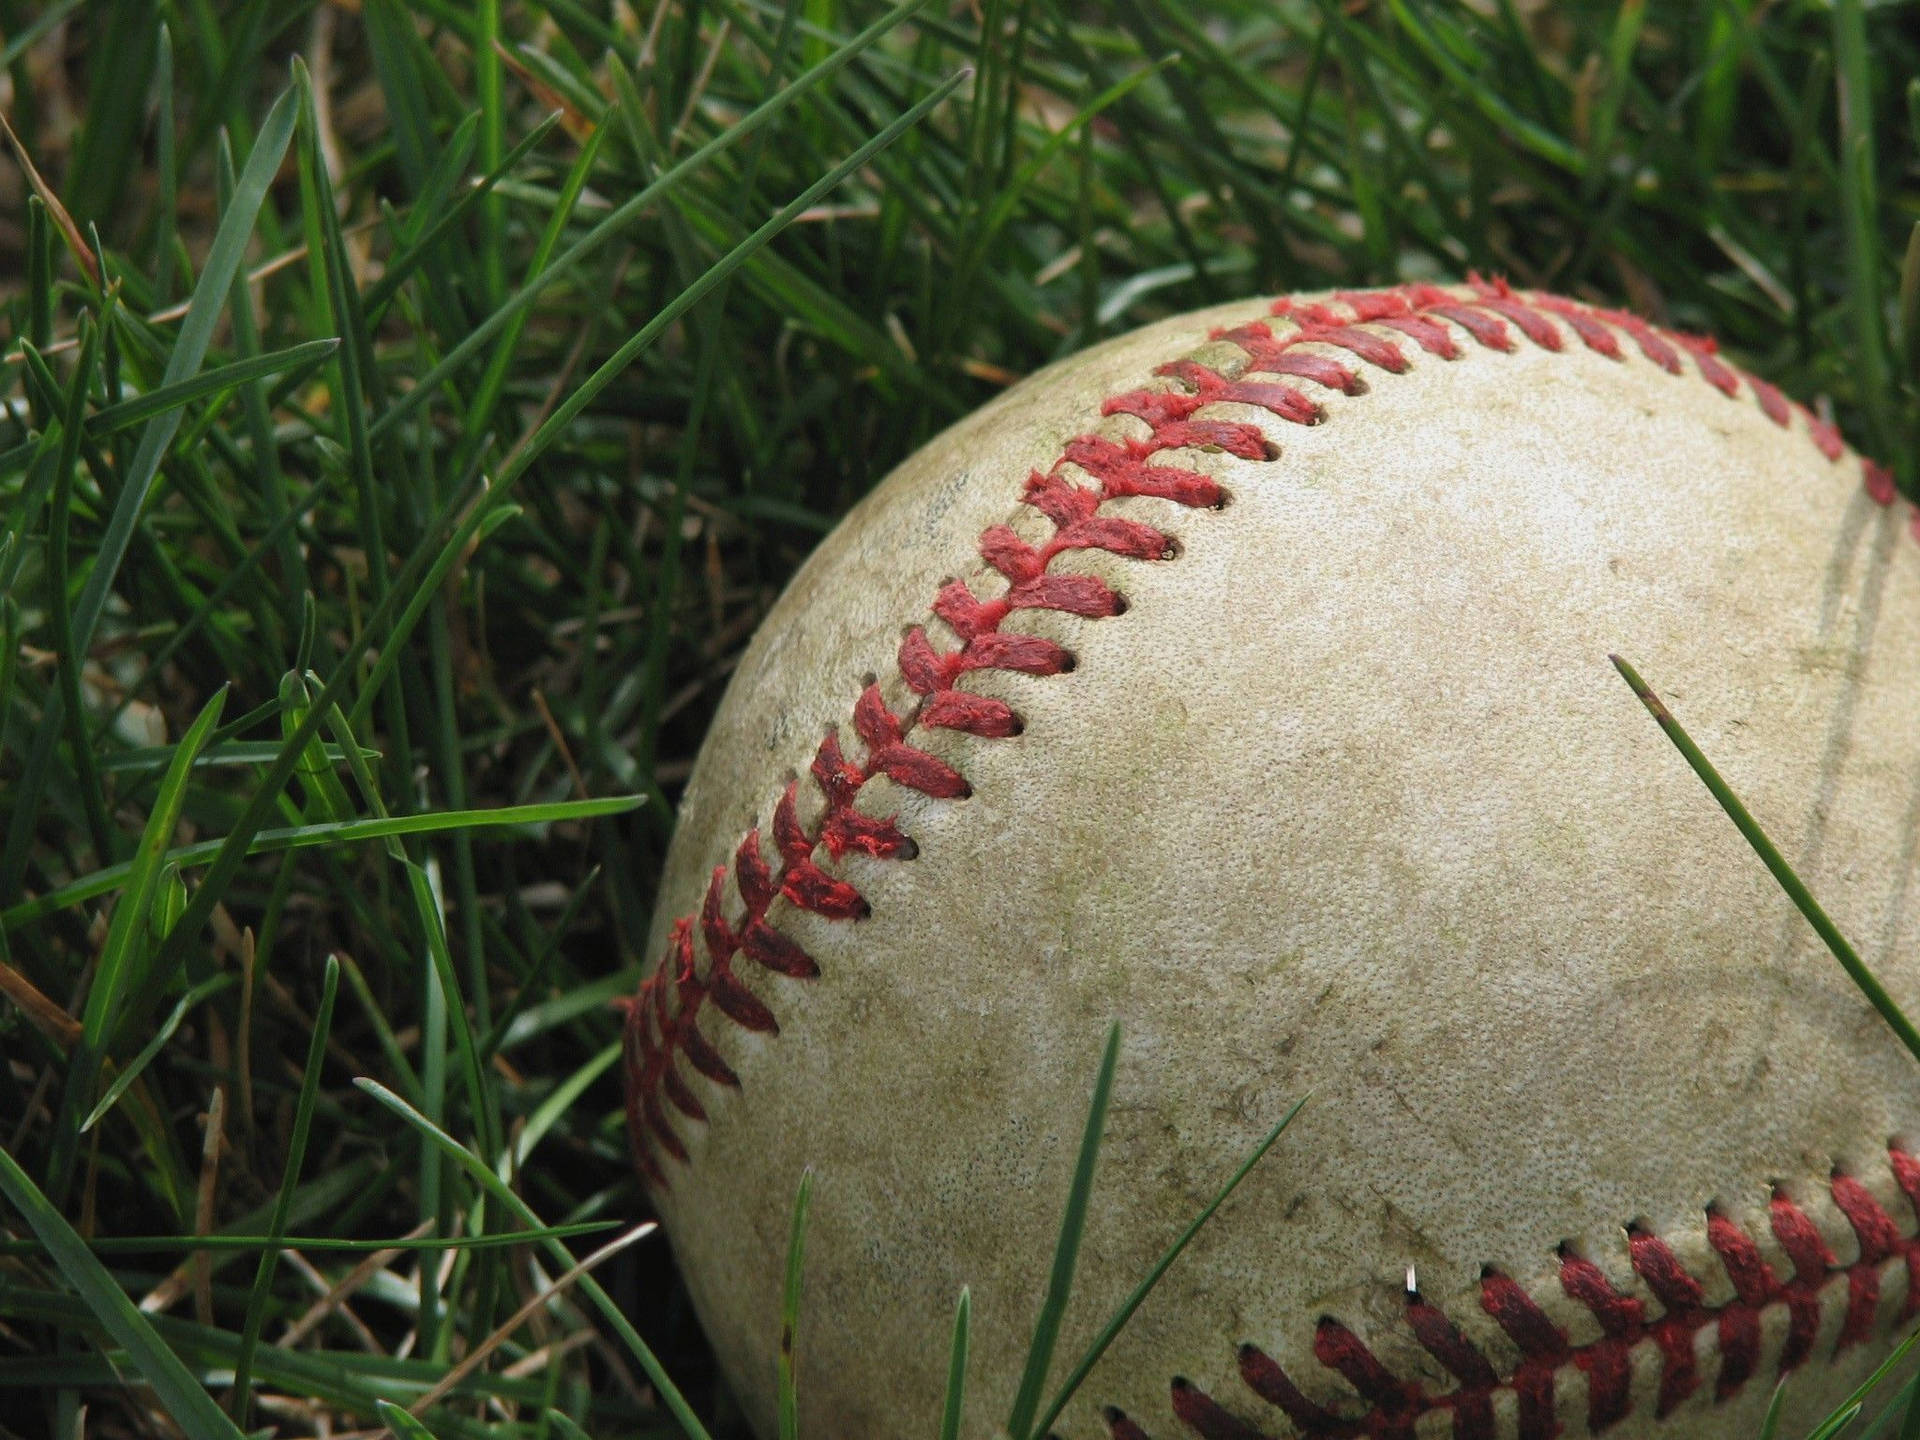 Used Dirty Baseball On Grass Background